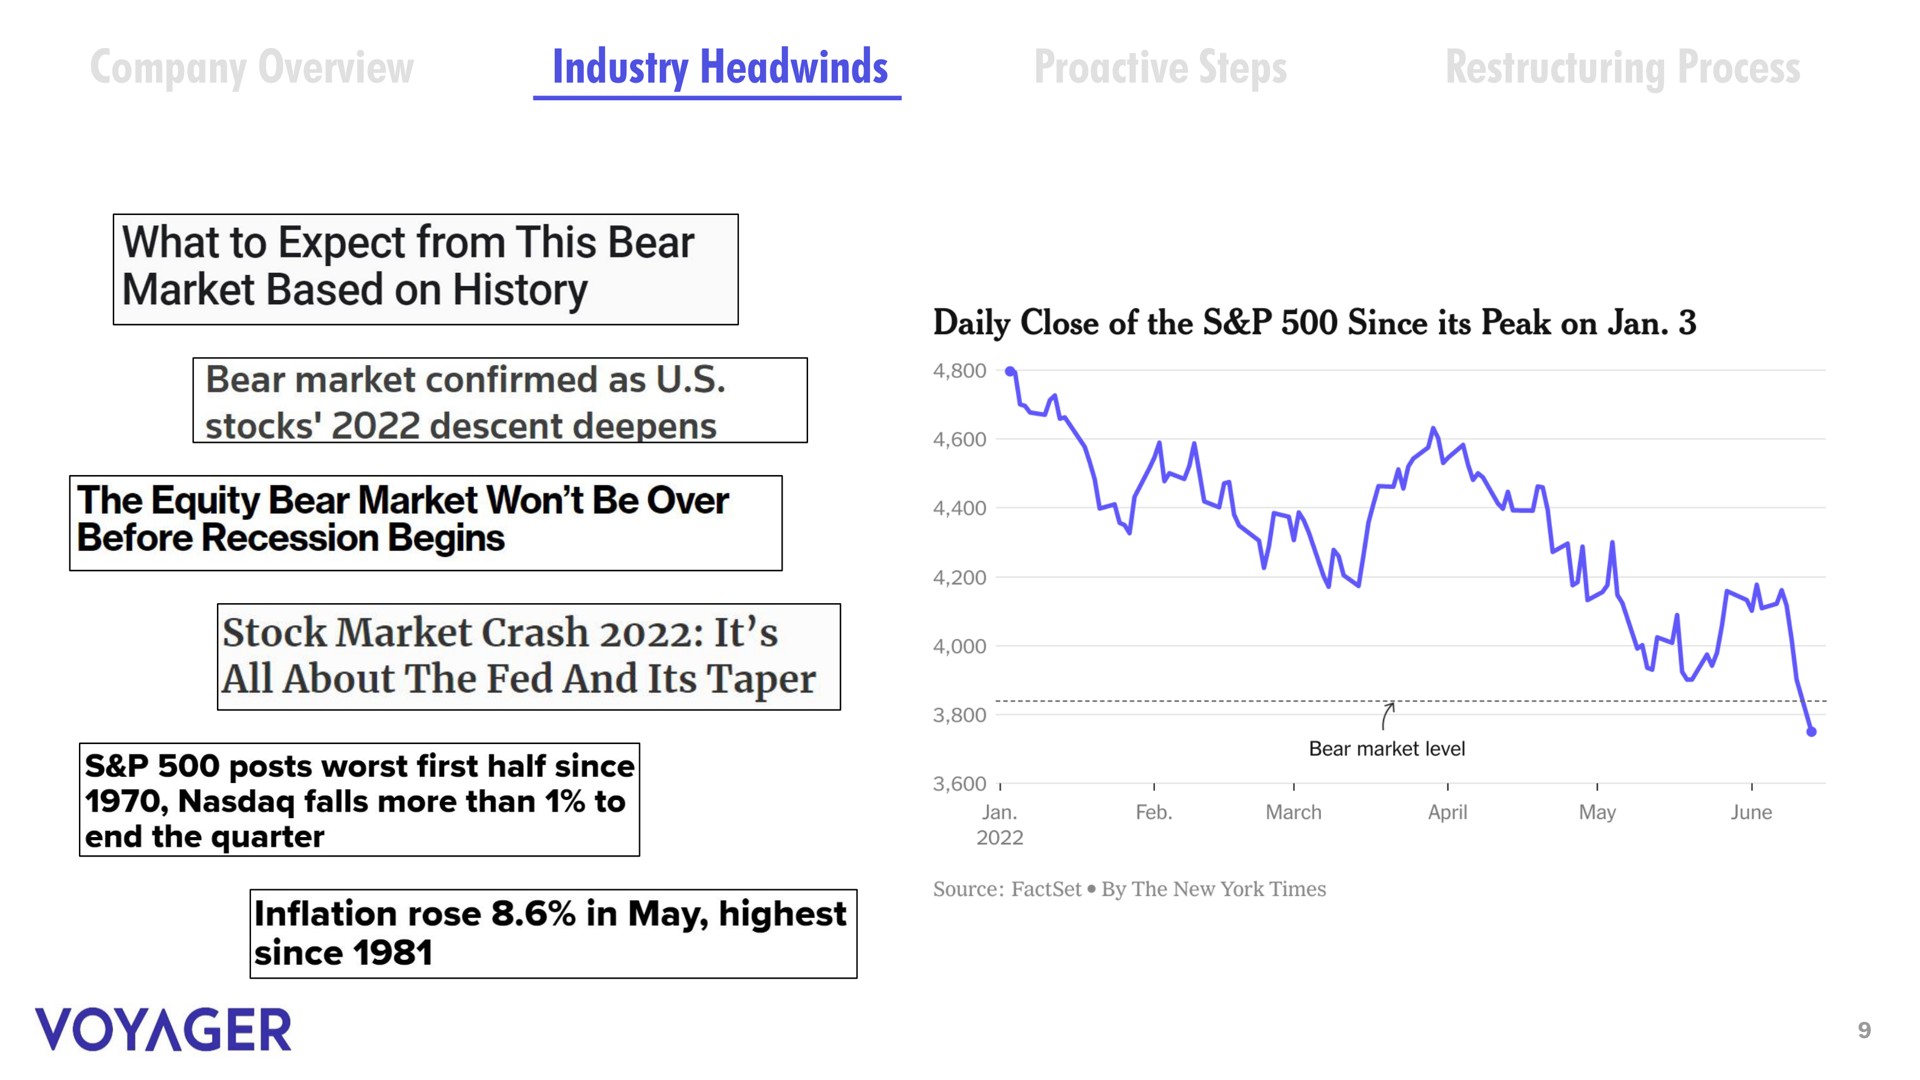 company overview industry steps process what to expect from this bear market based on history daily close of the since its peak on bear market confirmed as the equity bear market won be over before recession begins stock market crash it all about the fed and its taper inflation rose in may highest since voyager | Voyager Digital